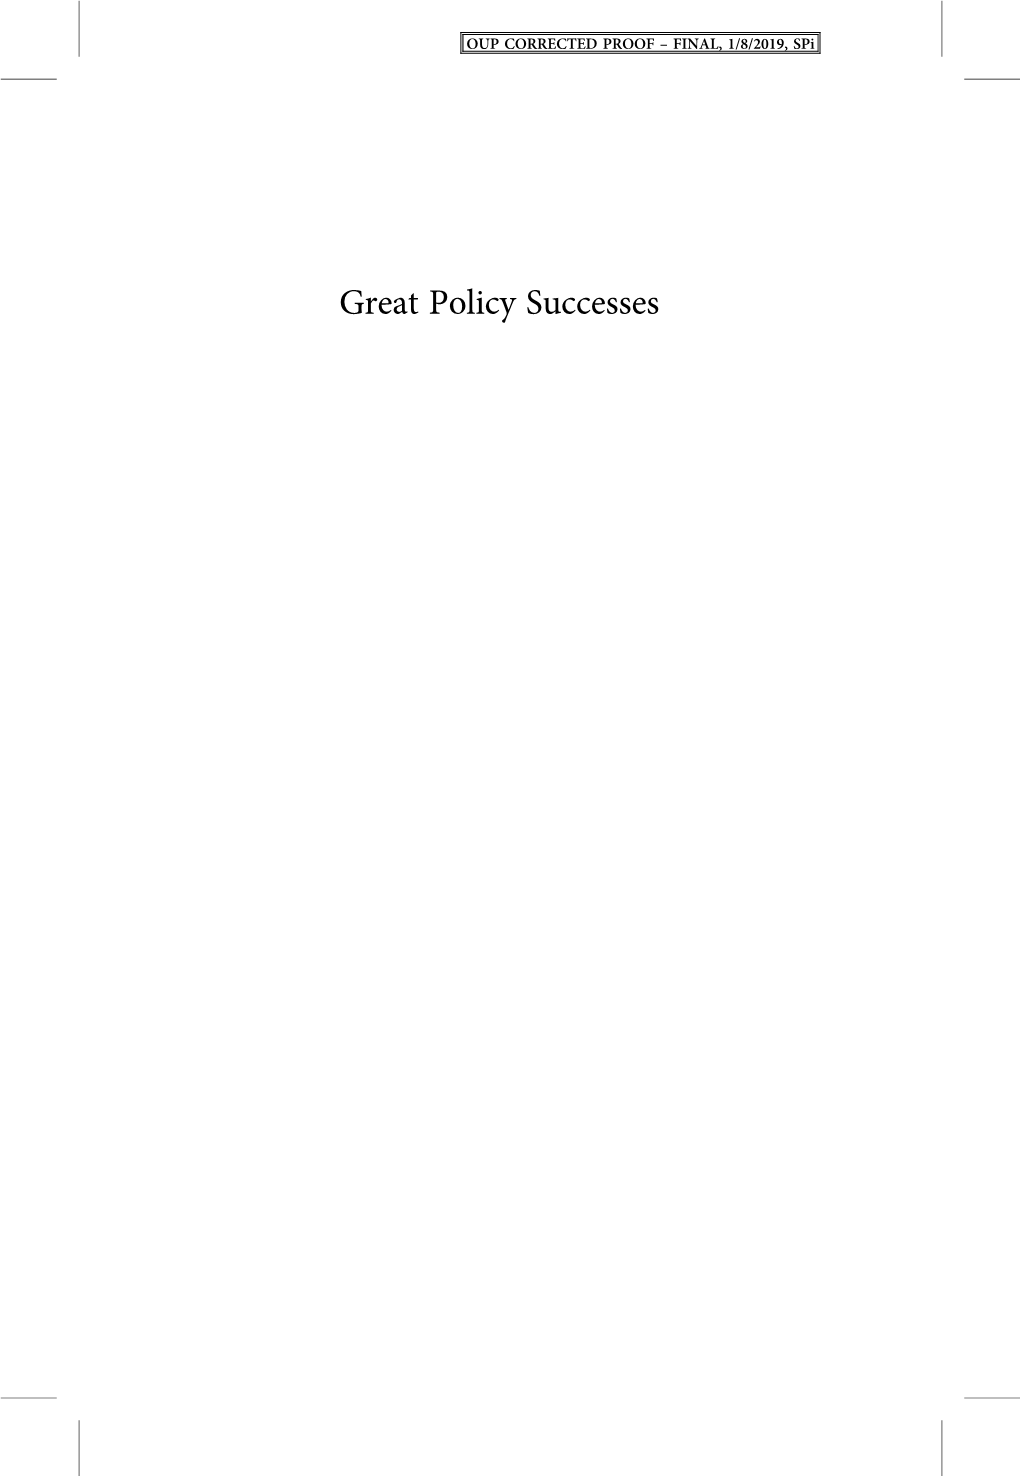 Great Policy Successes OUP CORRECTED PROOF – FINAL, 1/8/2019, Spi OUP CORRECTED PROOF – FINAL, 1/8/2019, Spi